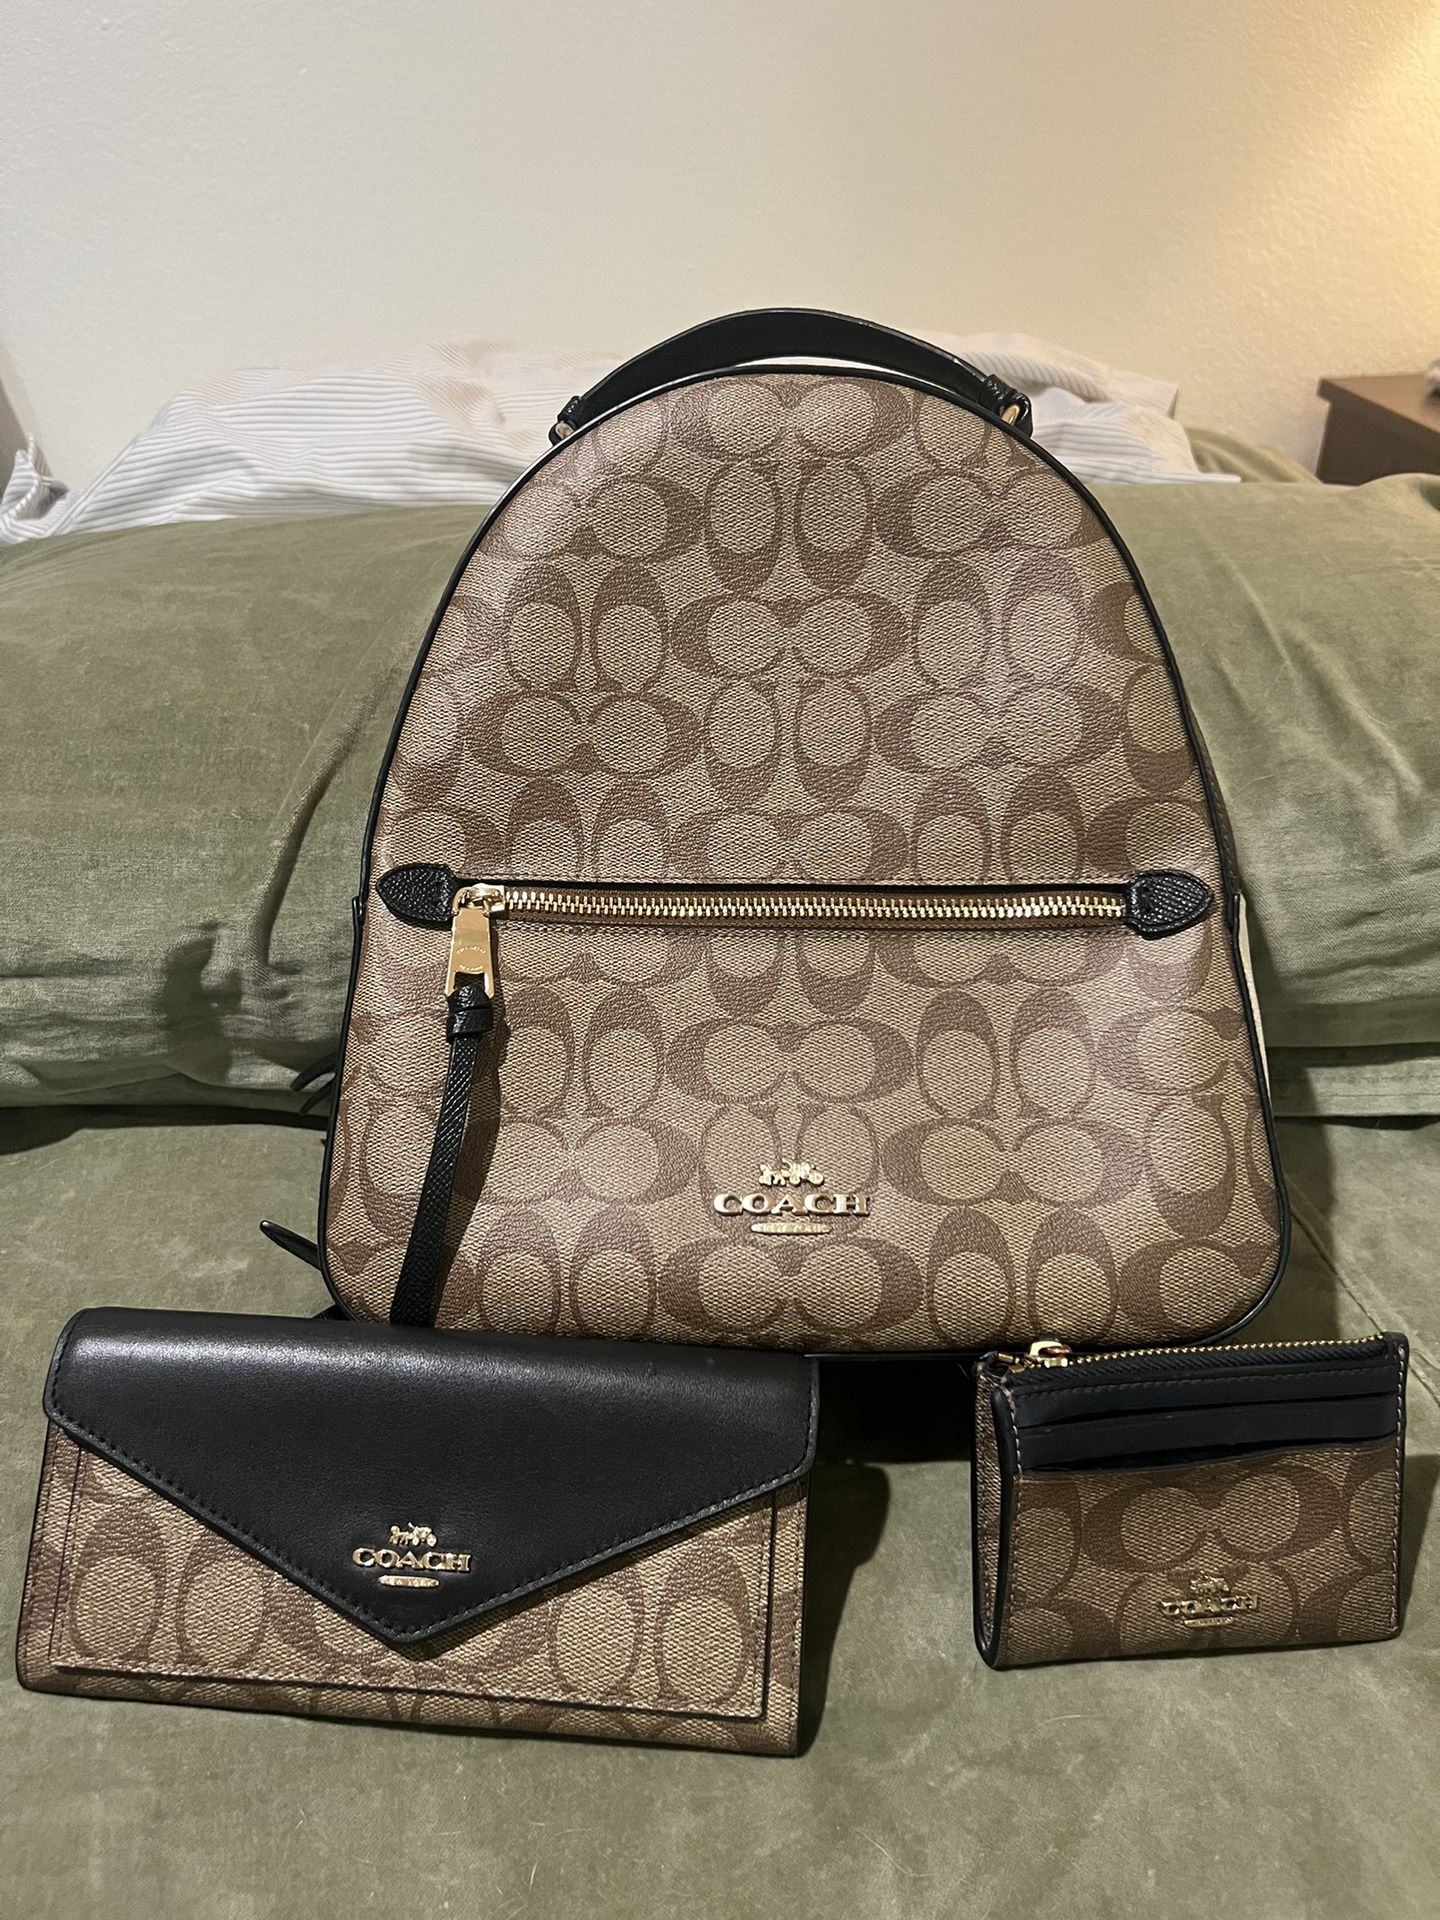 Coach Backpack, Wallet And Coin Purse